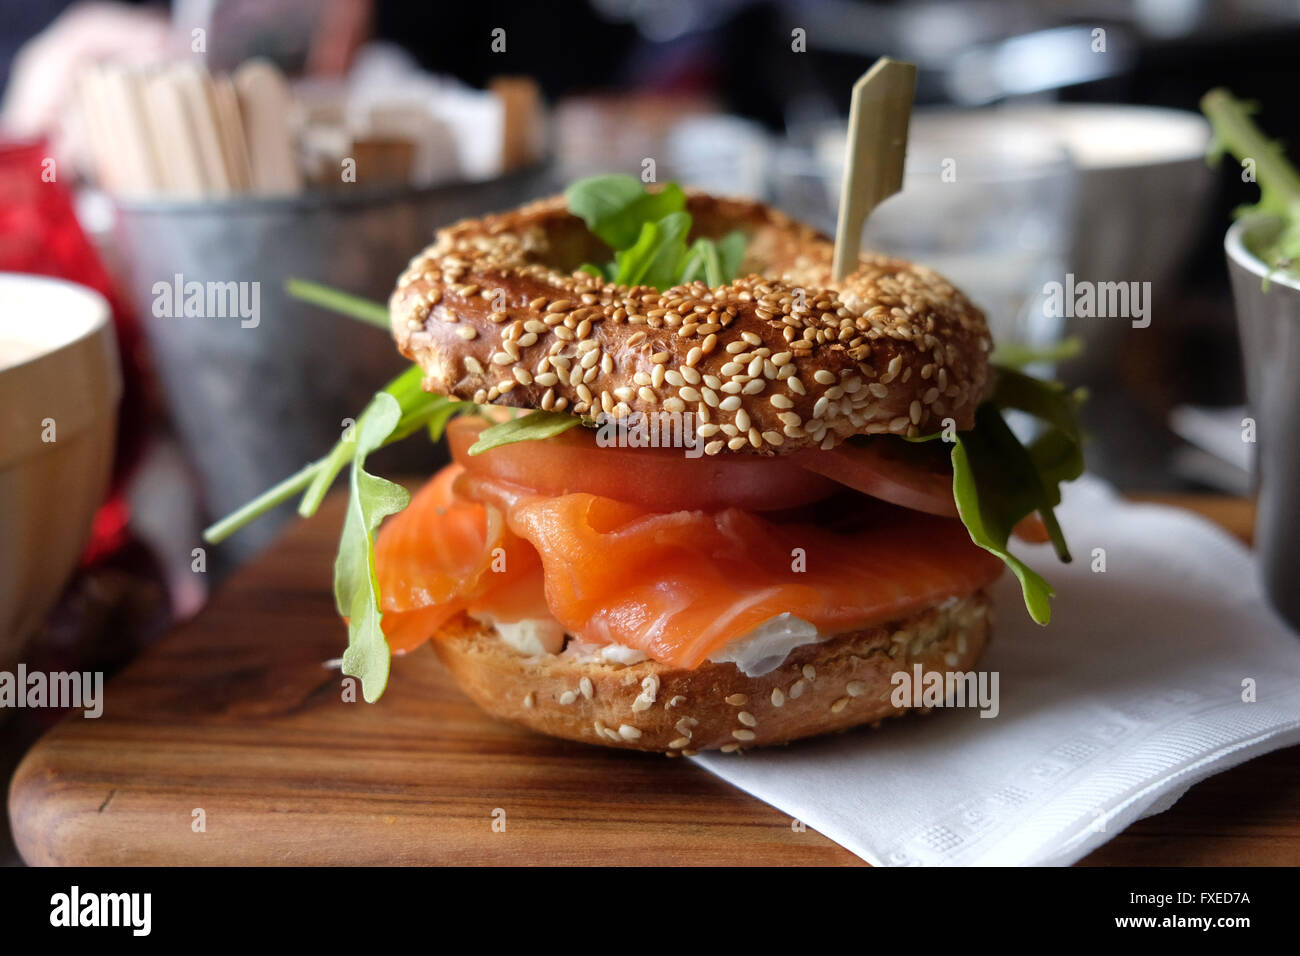 A bagel with Salmon and Cream Cheese, served in a cafe in Montreal, Canada. Stock Photo